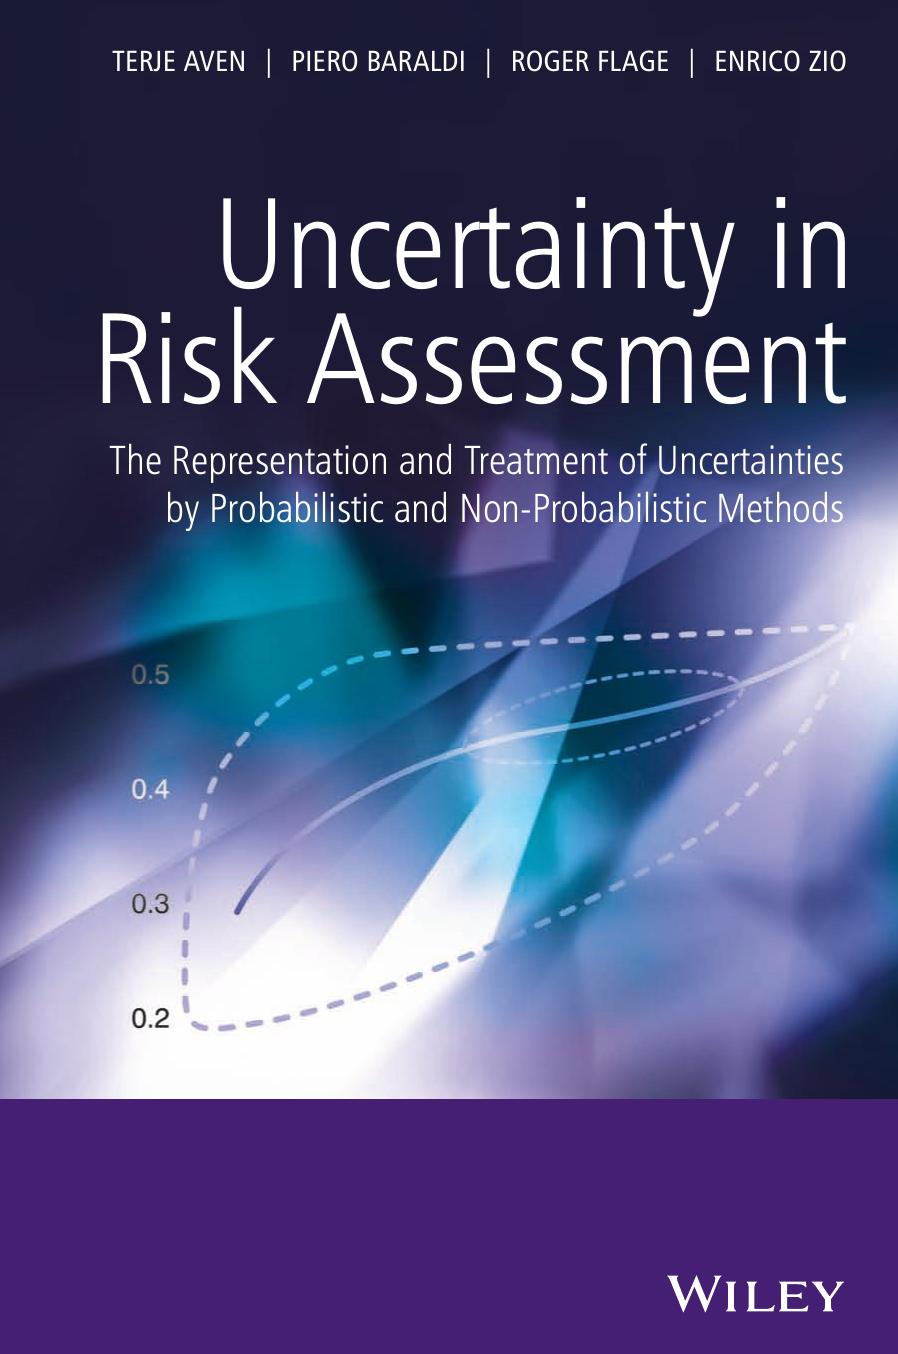 Uncertainty in Risk Assessment : The Representation and Treatment of Uncertainties by Probabilistic and Non-Probabilistic Methods by Terje Aven; Enrico Zio; Piero Baraldi; Roger Flage; Aven